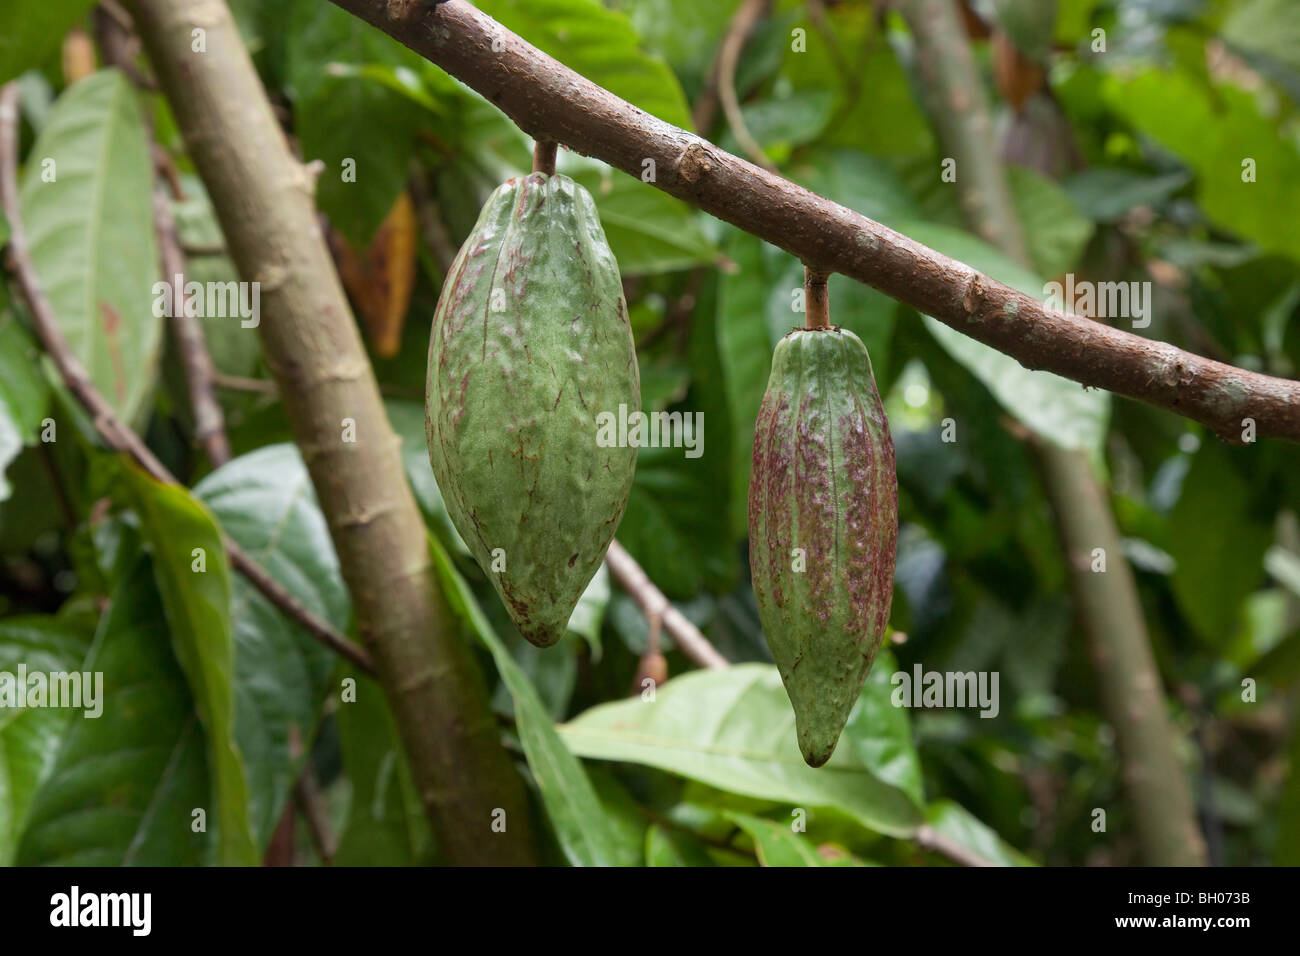 Cocoa pods hanging on the tree Stock Photo